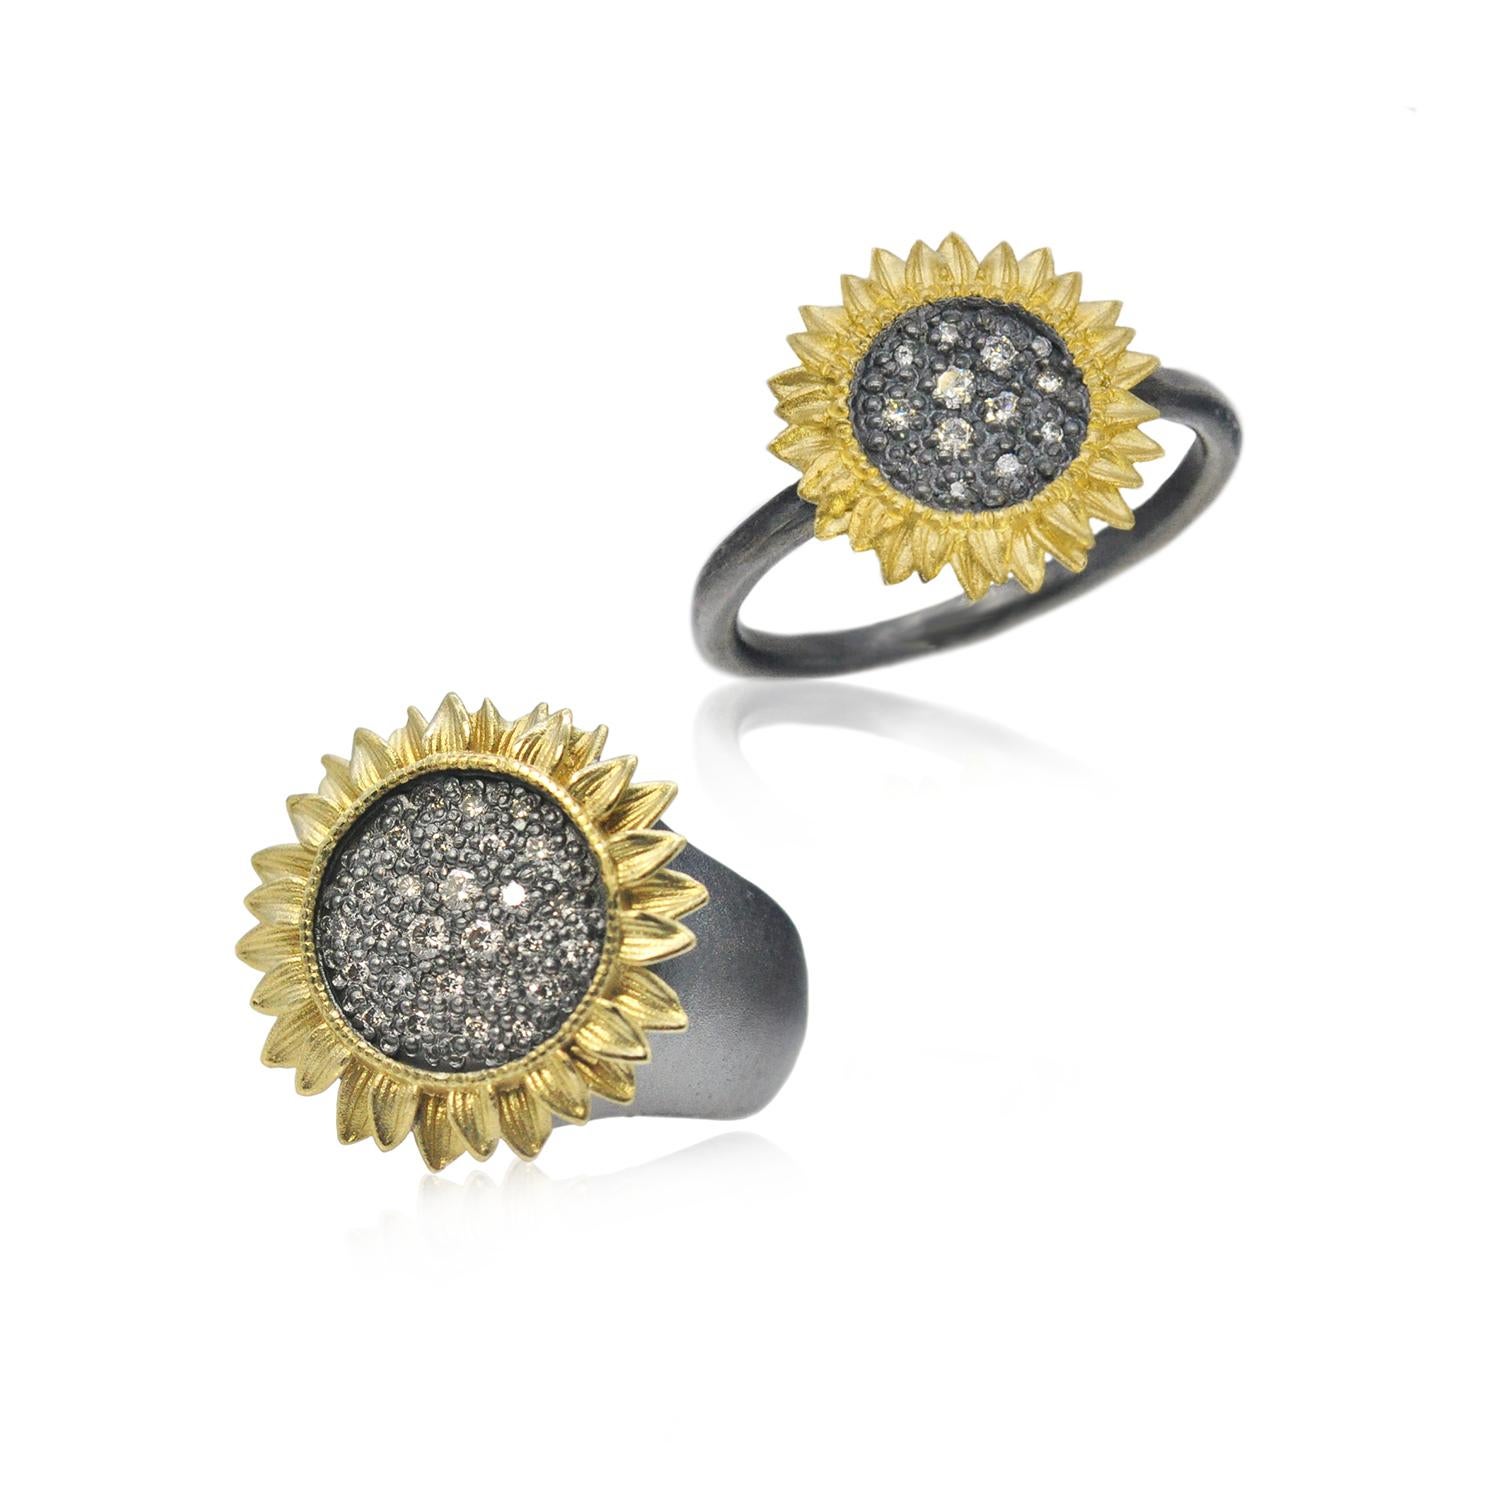 For Sale:  Sunflower Ring with Pave Set Diamonds in Oxidized Silver, Large 3